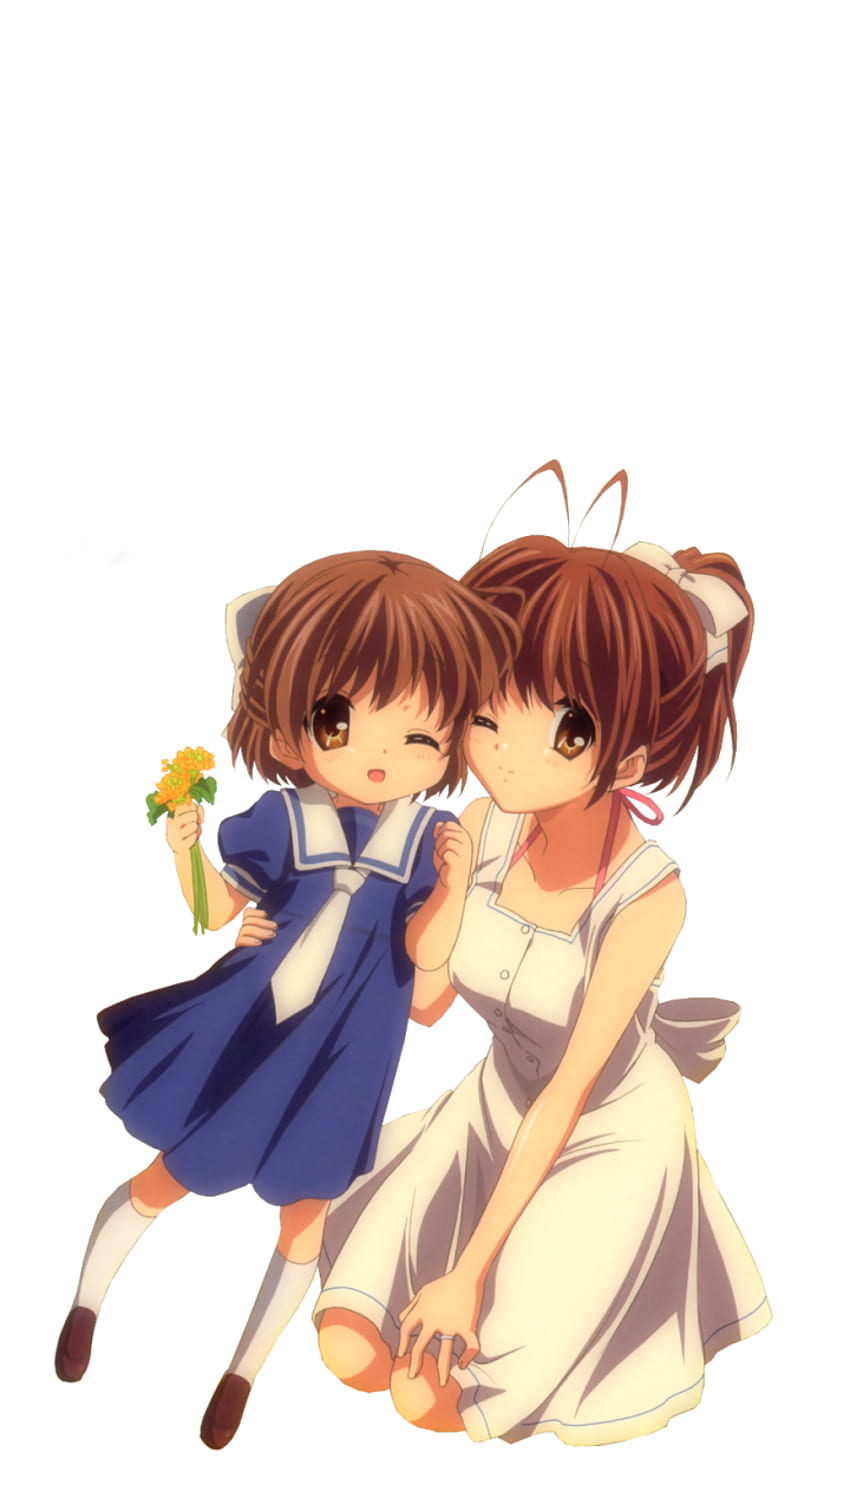 Dillon's Game and Anime Reviews: REVIEW - Clannad After Story (2007)